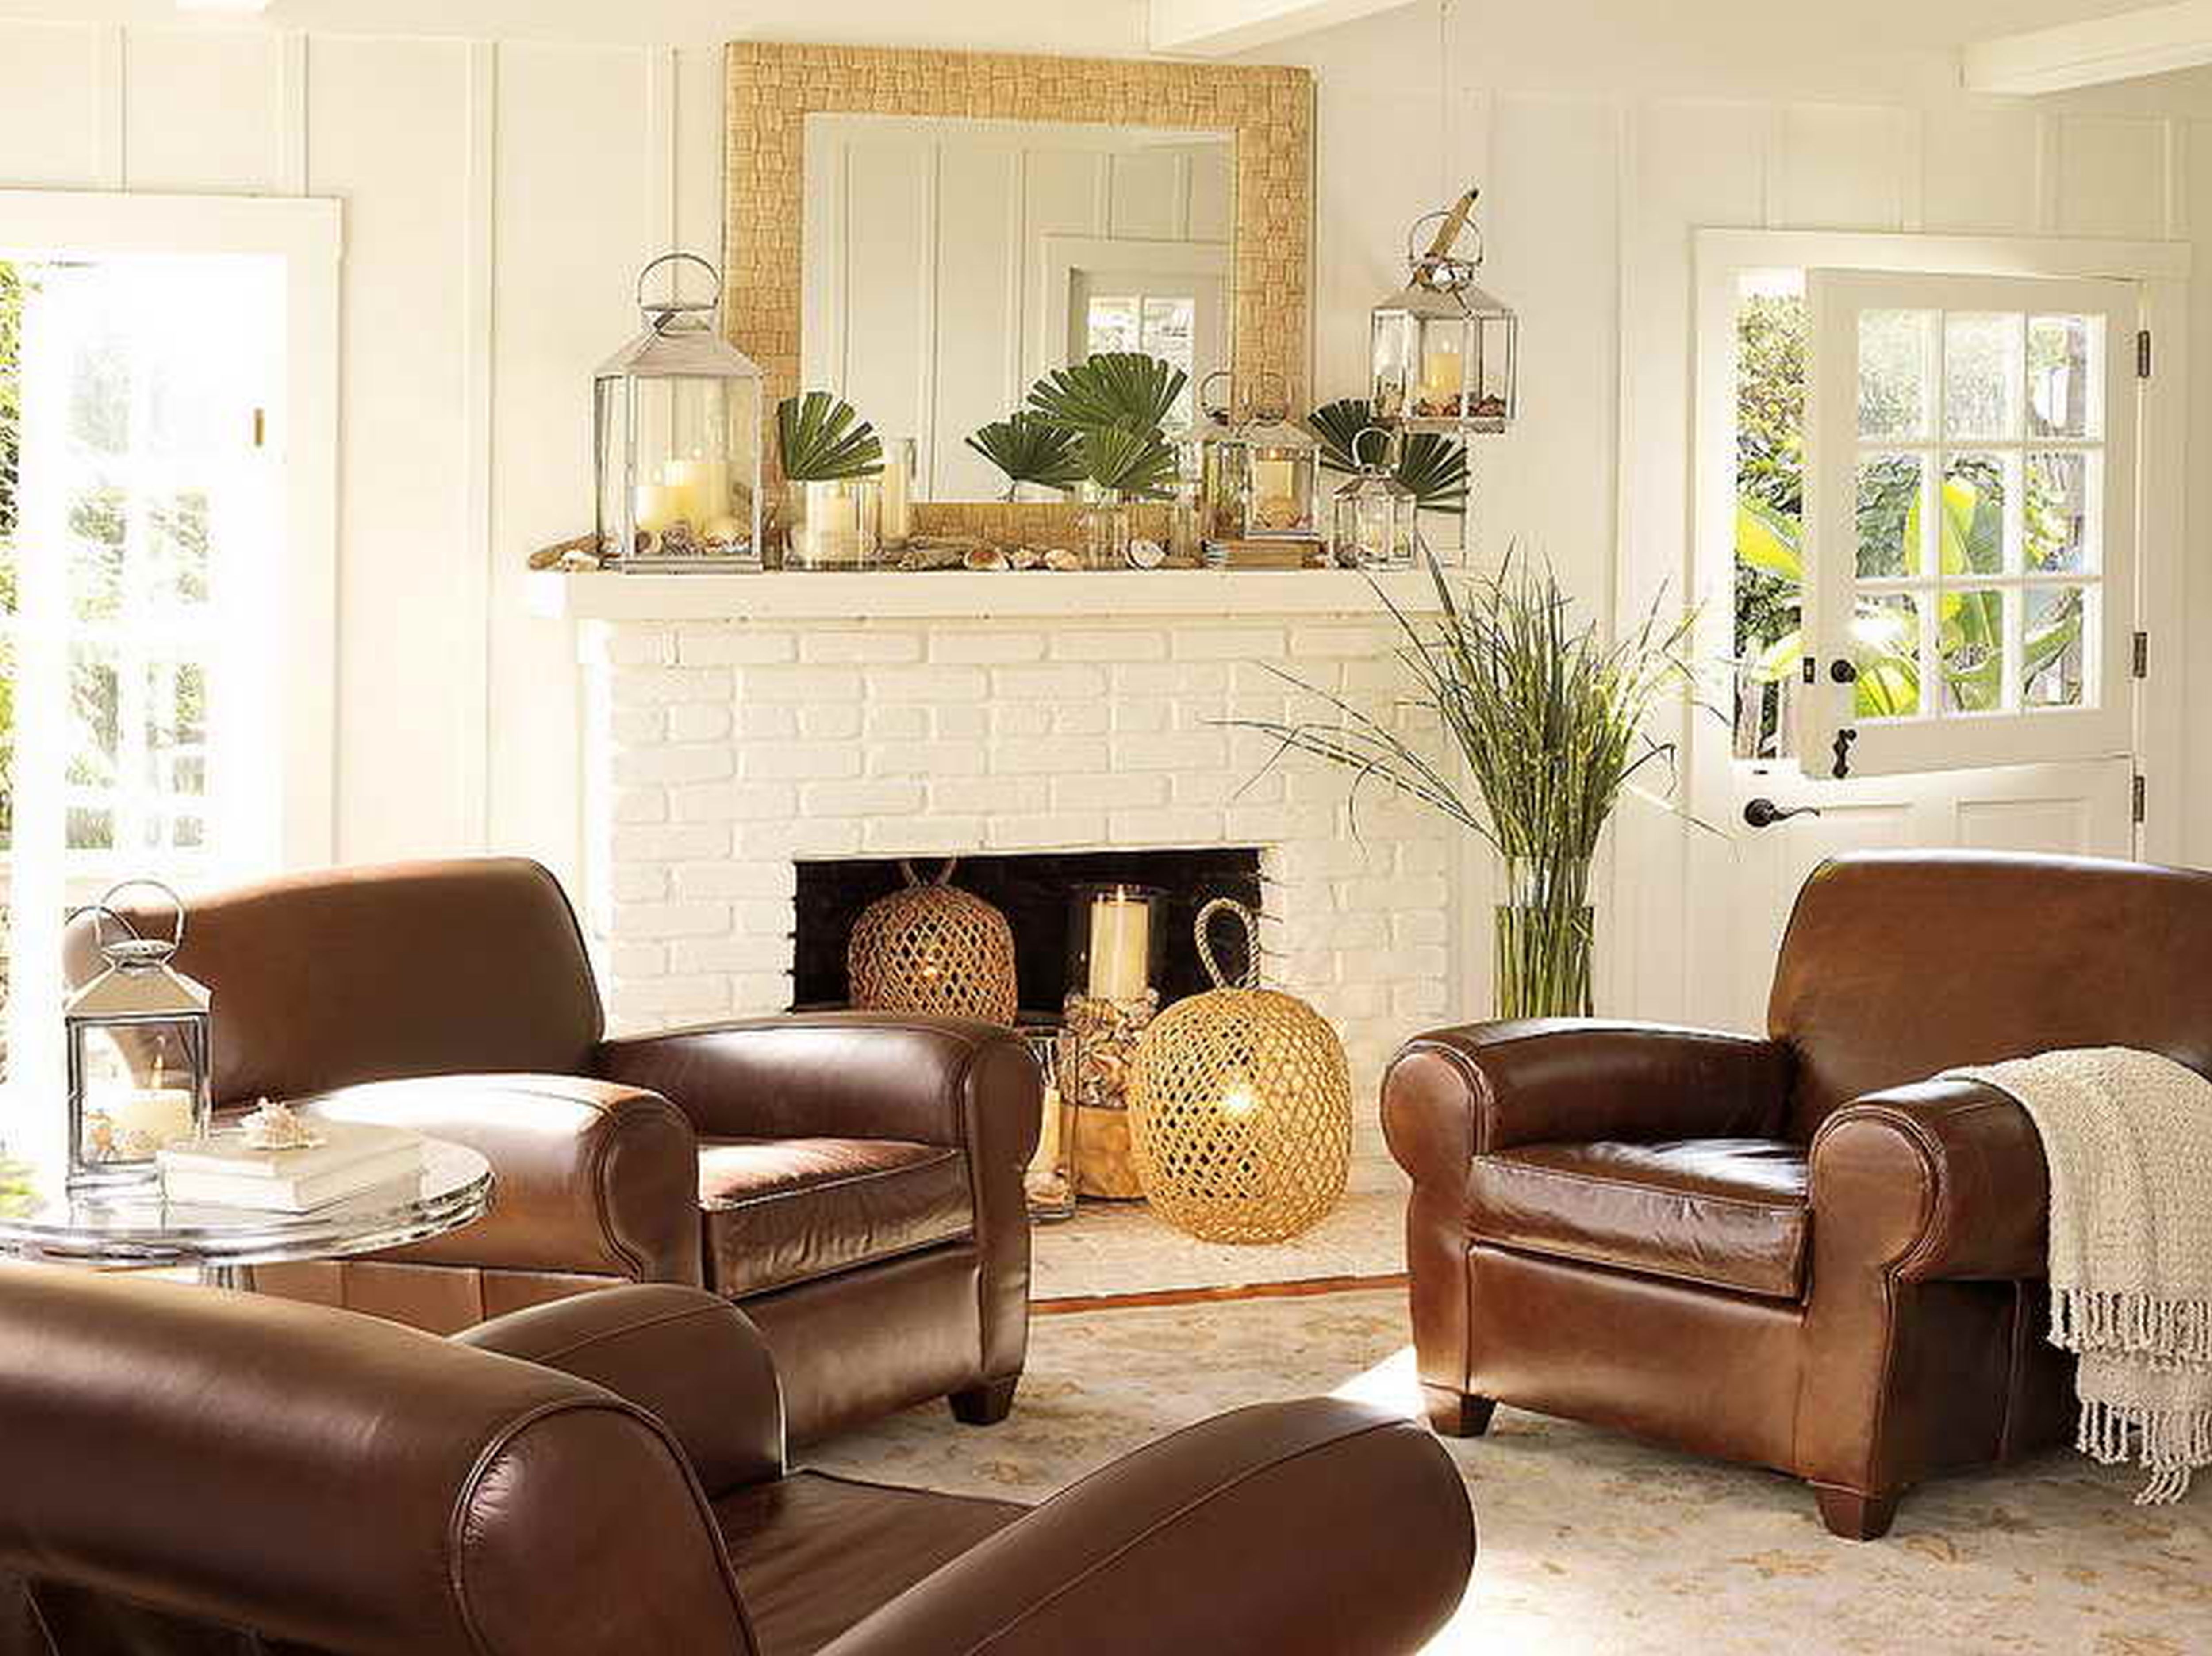 Find 78+ Gorgeous inexpensive decorating ideas for living room Top Choices Of Architects